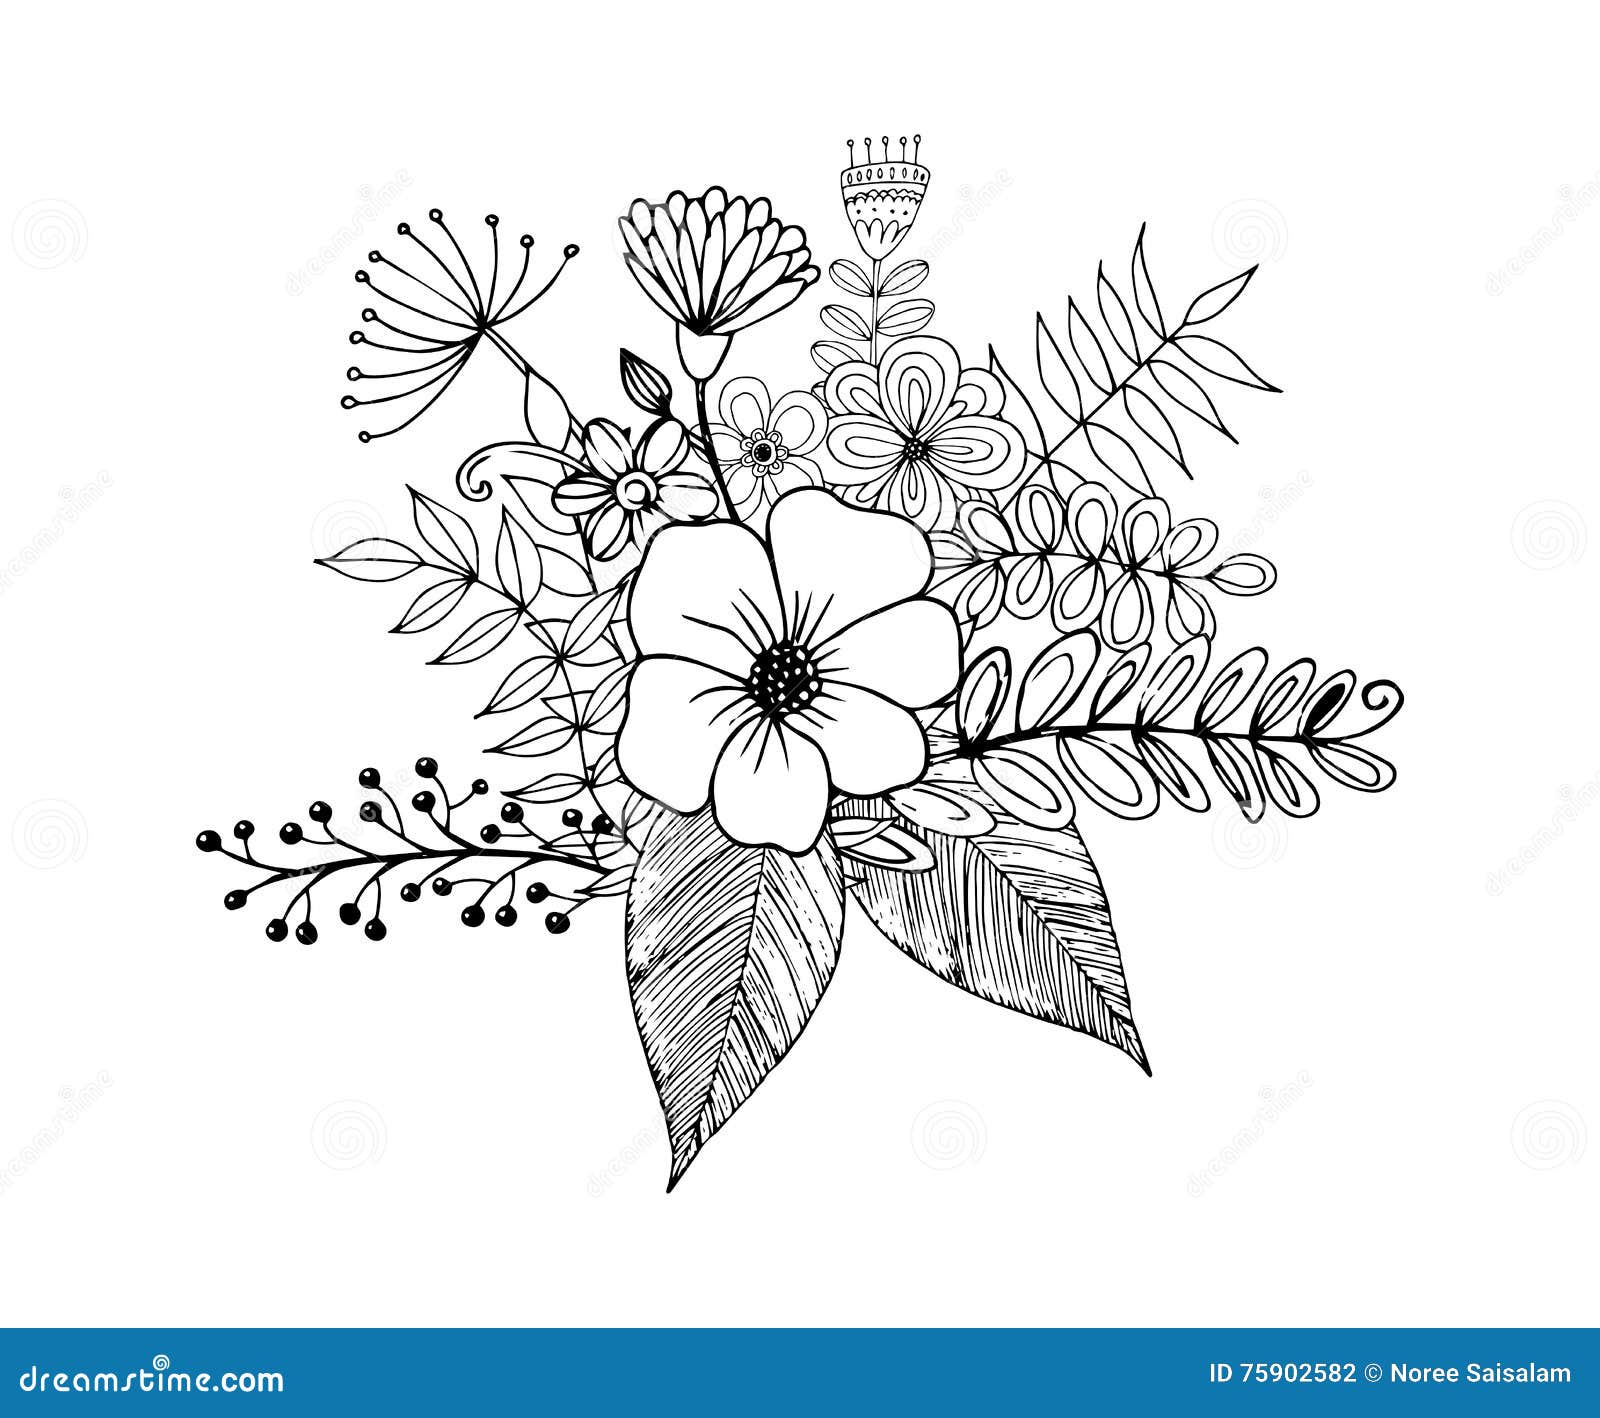 Flower Doodle Drawing Freehand Coloring Page With Doodle Stock